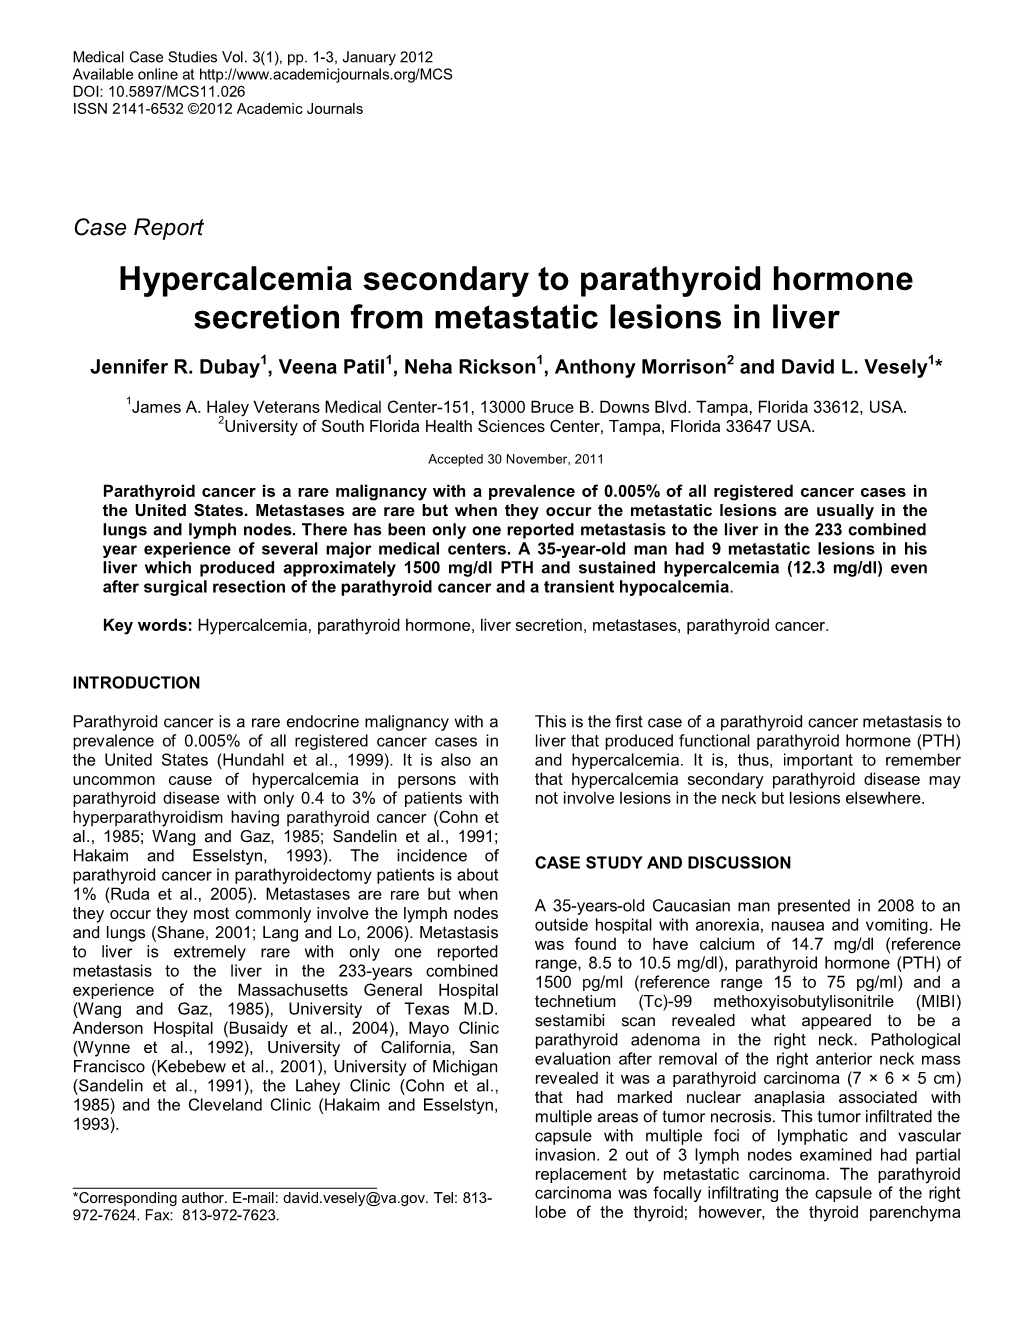 Hypercalcemia Secondary to Parathyroid Hormone Secretion from Metastatic Lesions in Liver